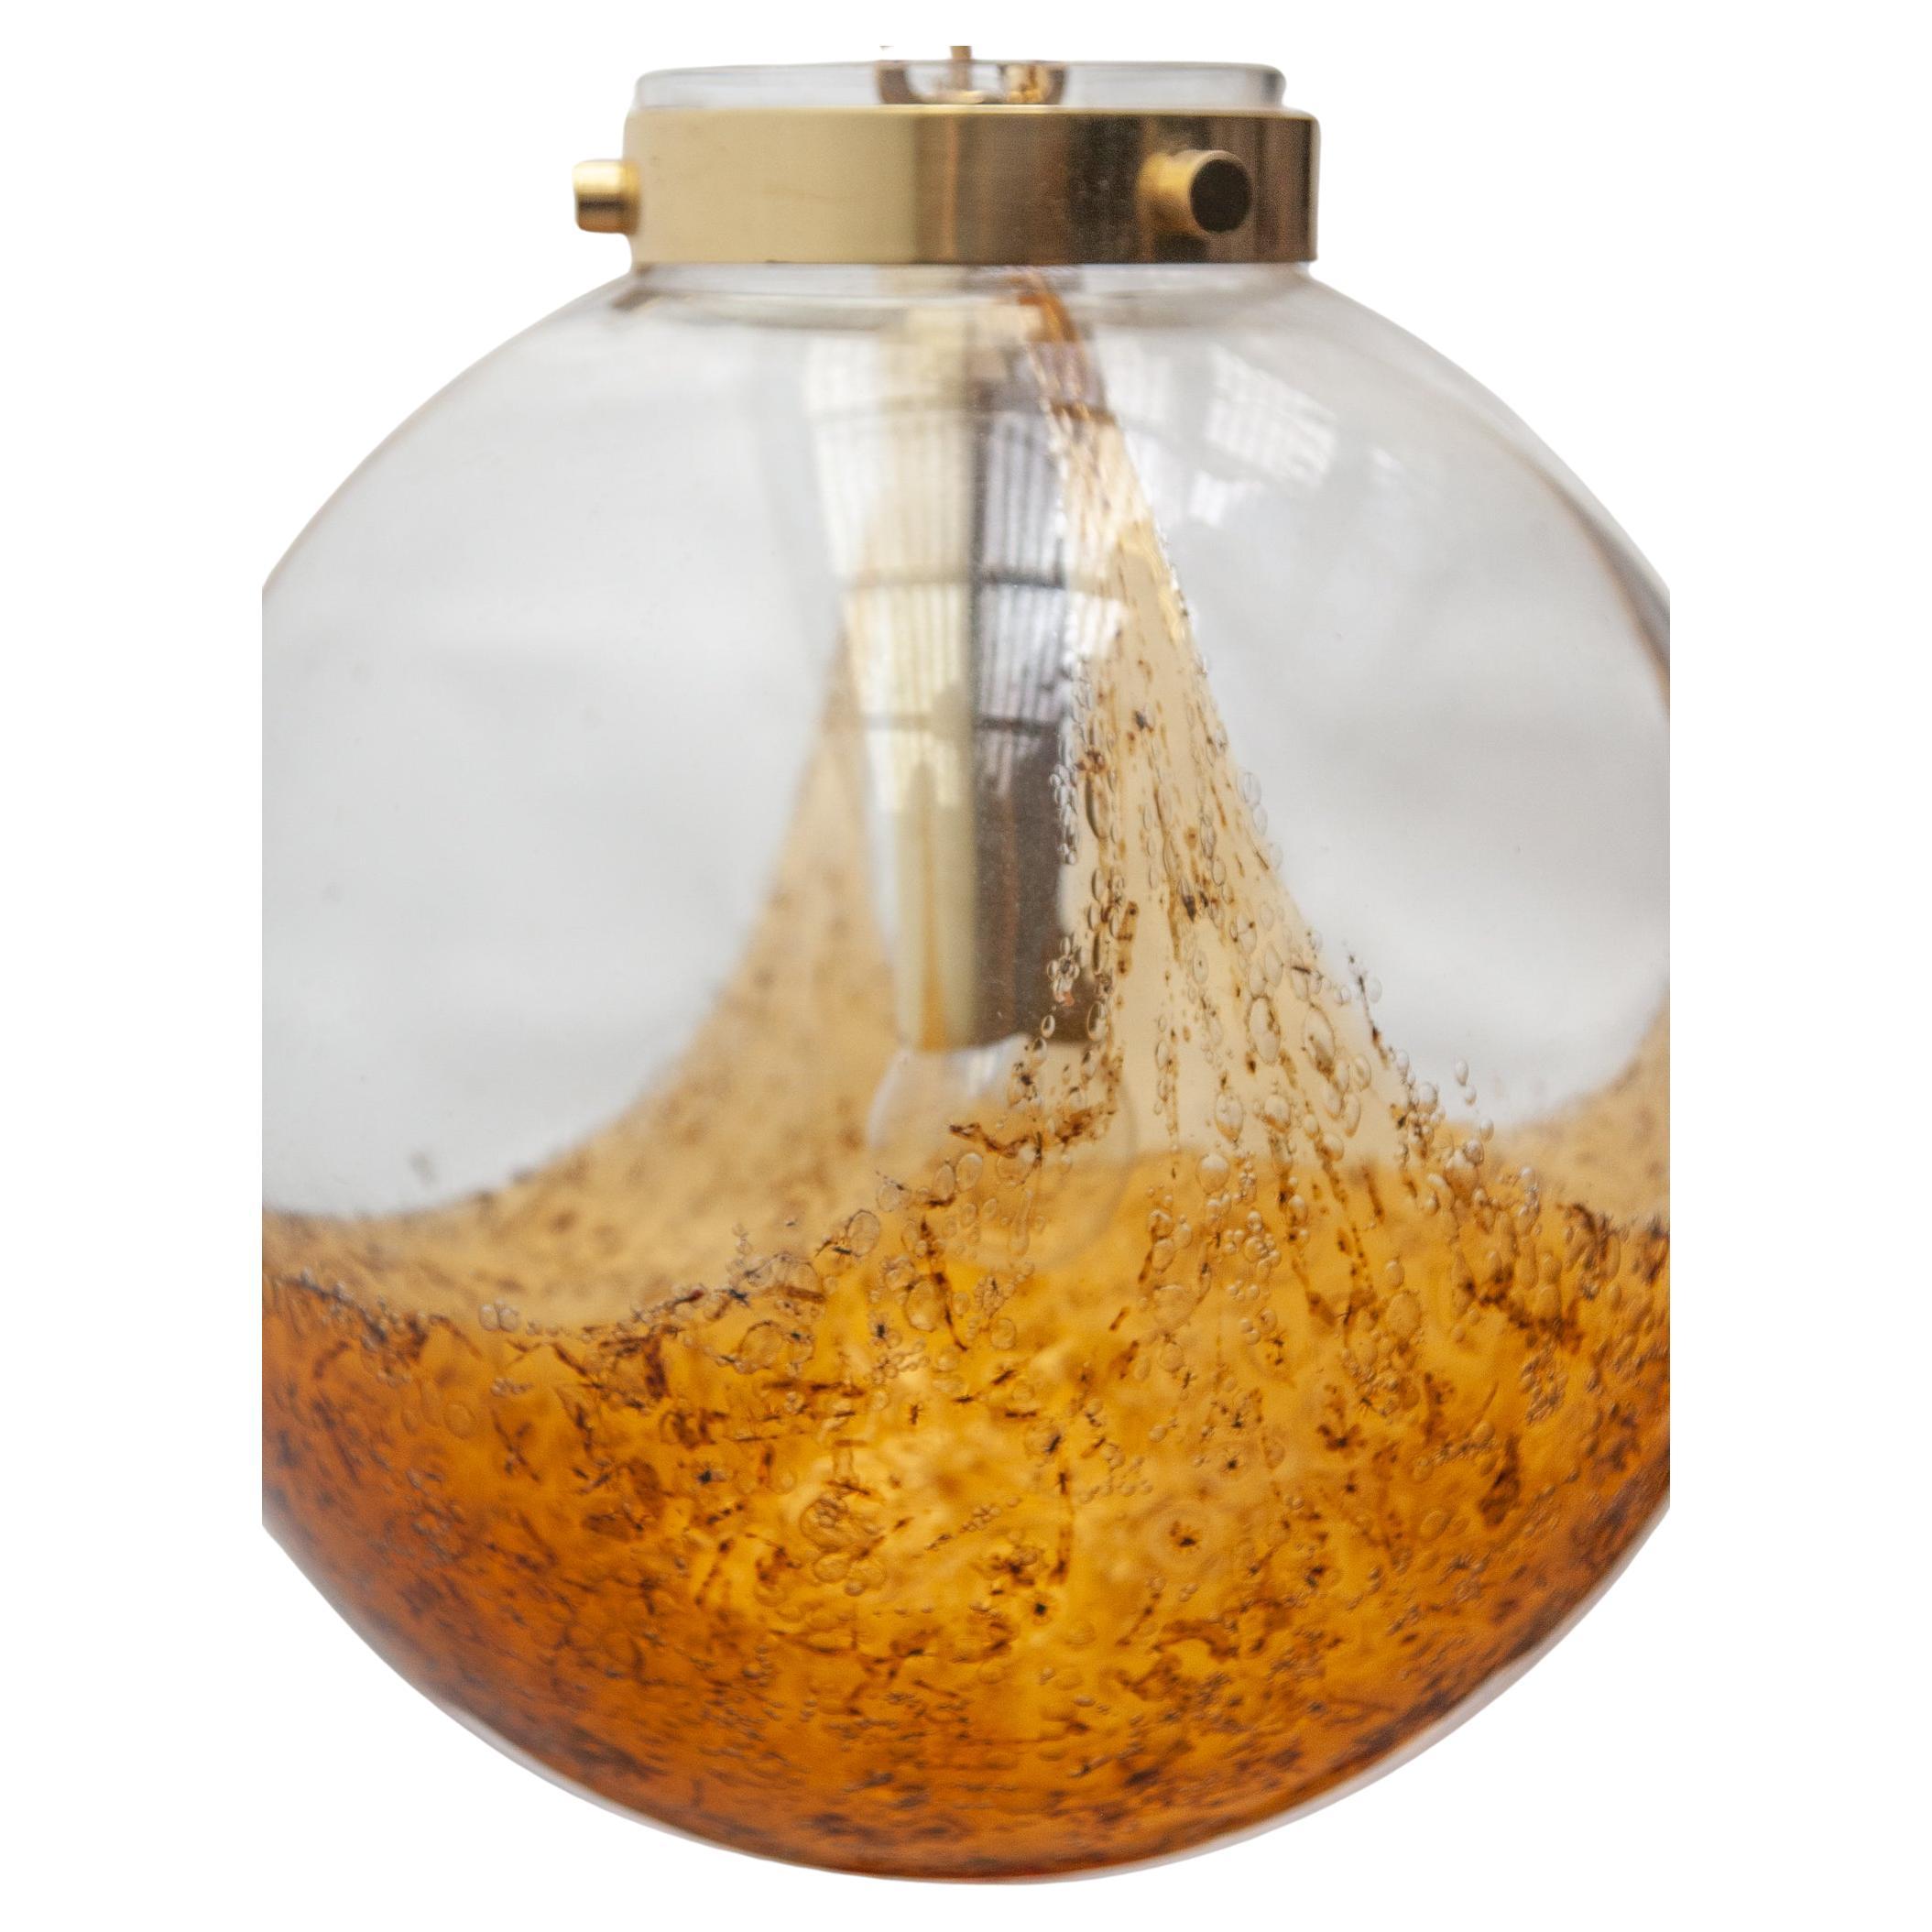 Beautiful exceptional glass globe pendant in the color of deep amber in contrast to clear glass attached to a brass chain. A typical 70s design pendant what will match in any contemporary interior.